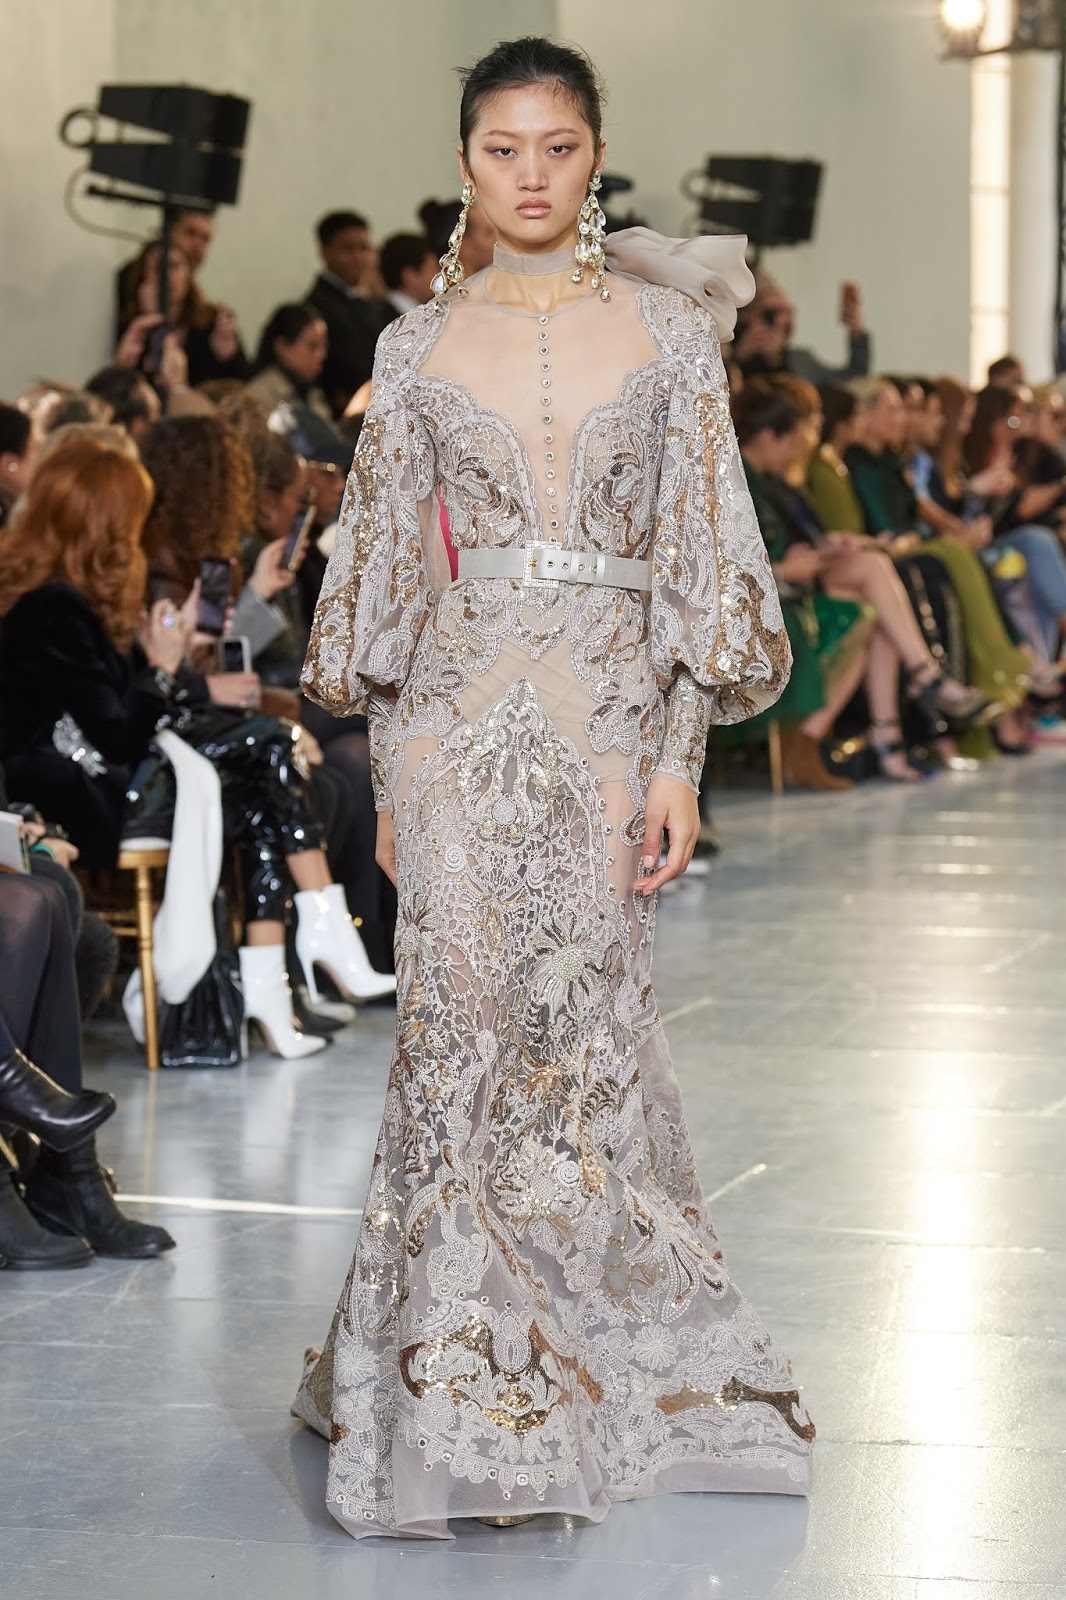 ELIE SAAB HAUTE COUTURE April 27, 2020 | ZsaZsa Bellagio - Like No Other